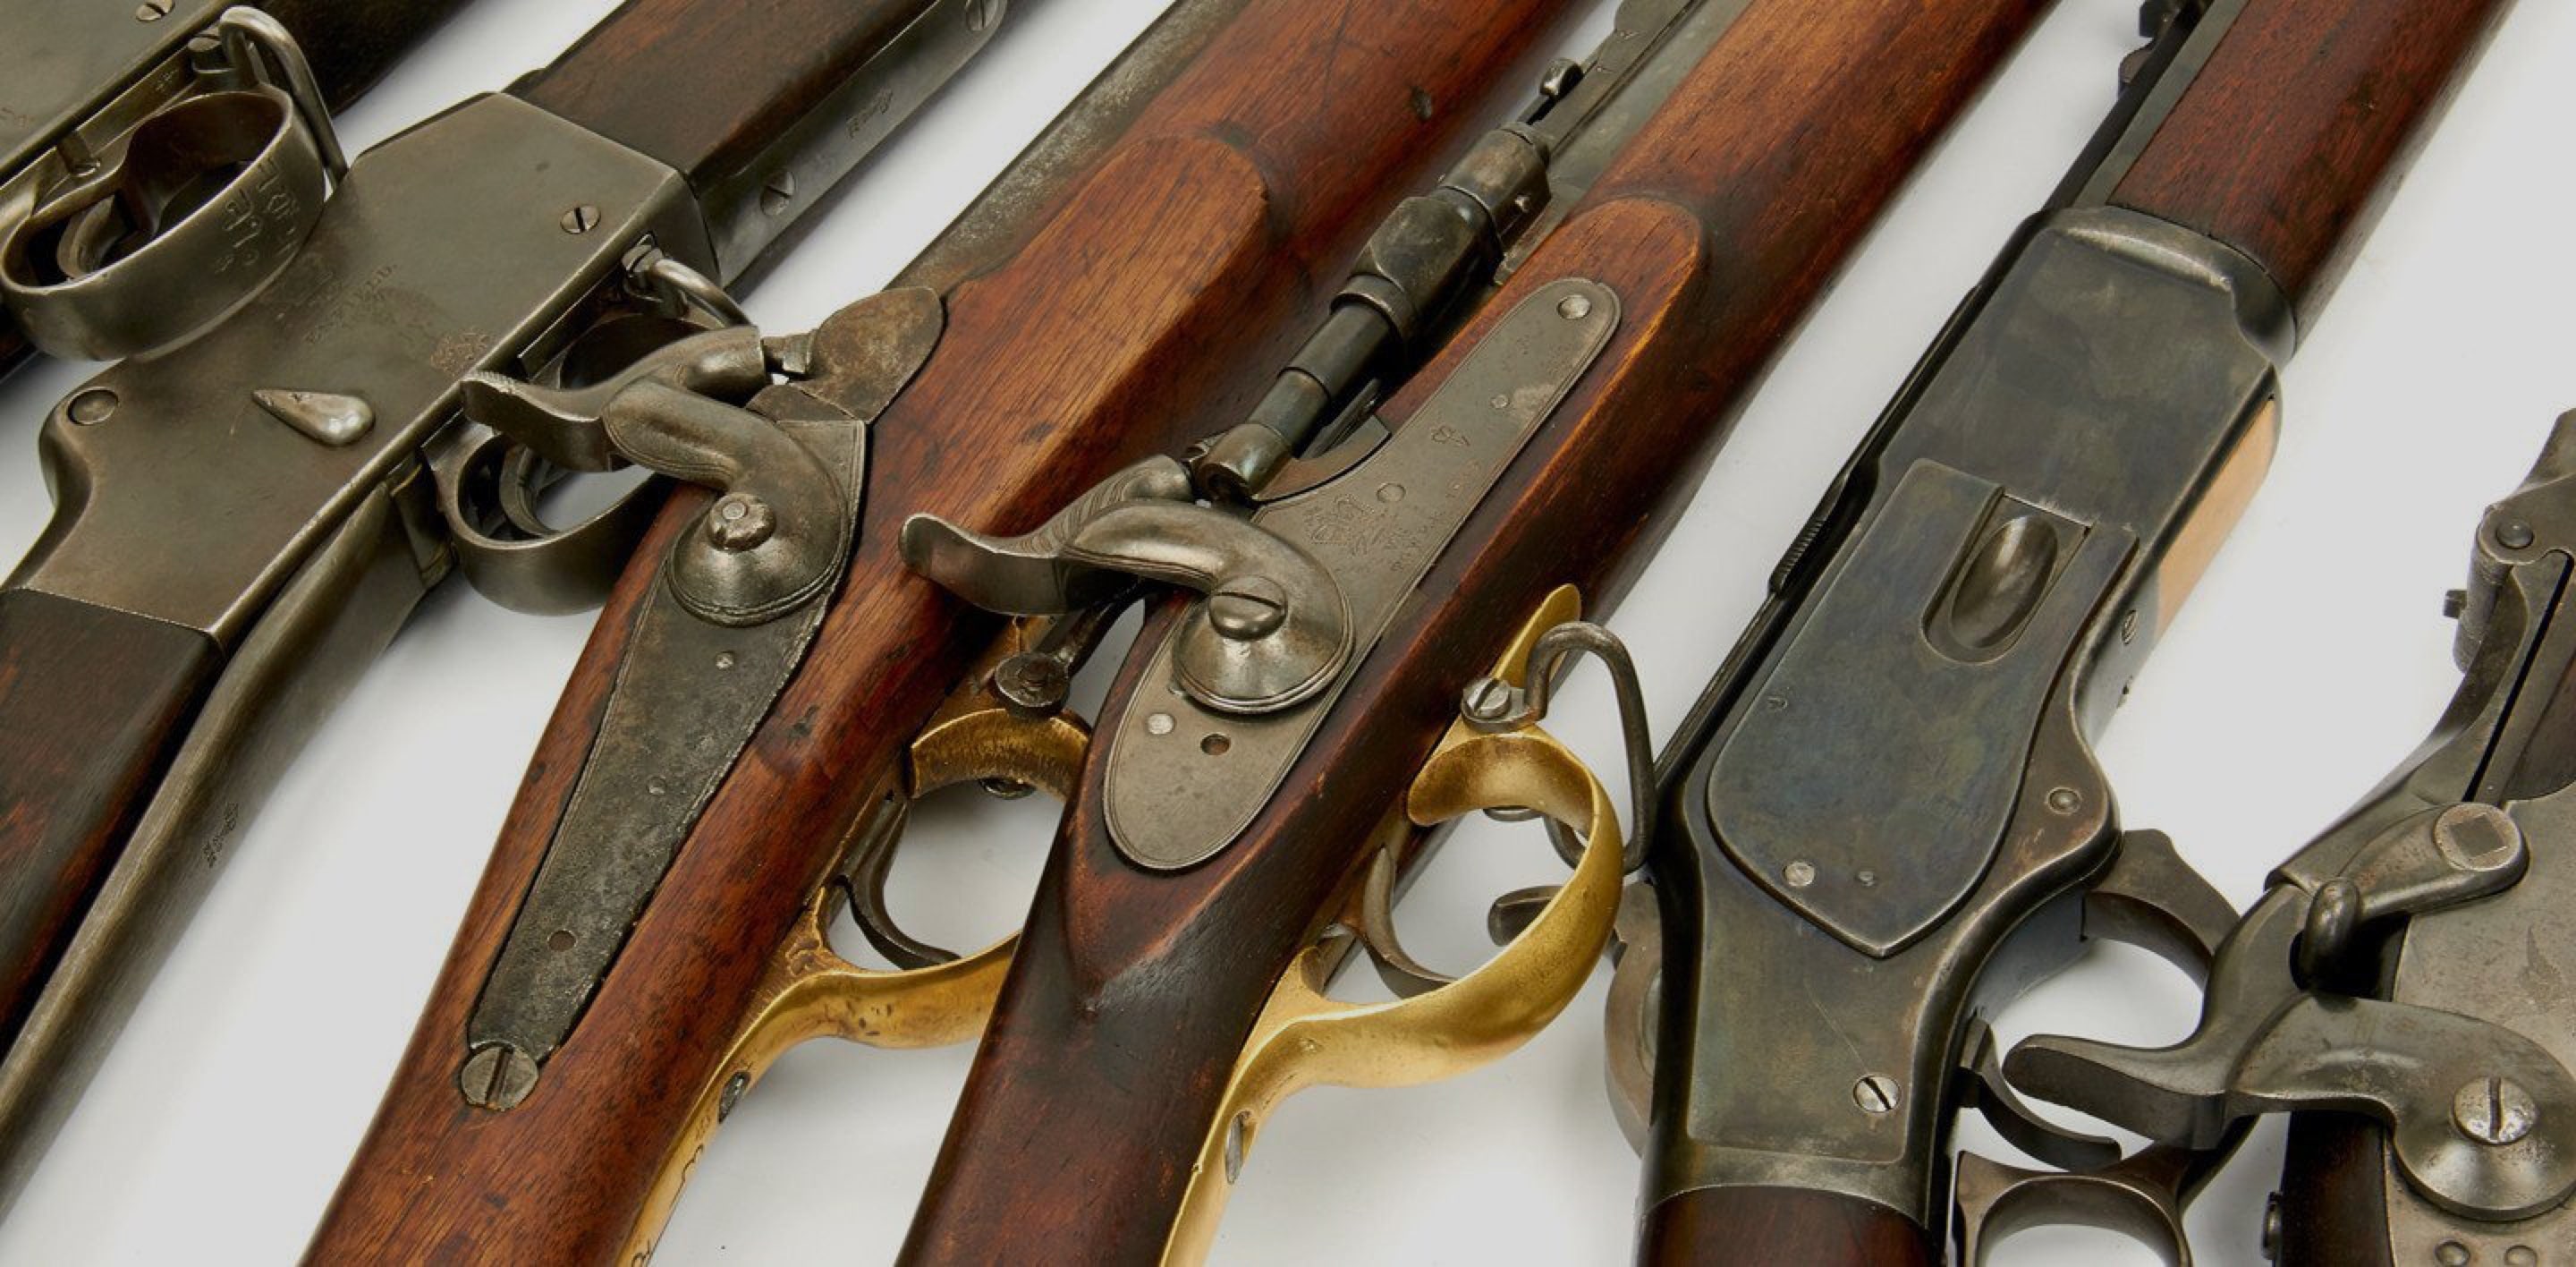 Antique military rifles are displayed in horizontal, laid across a white surface.